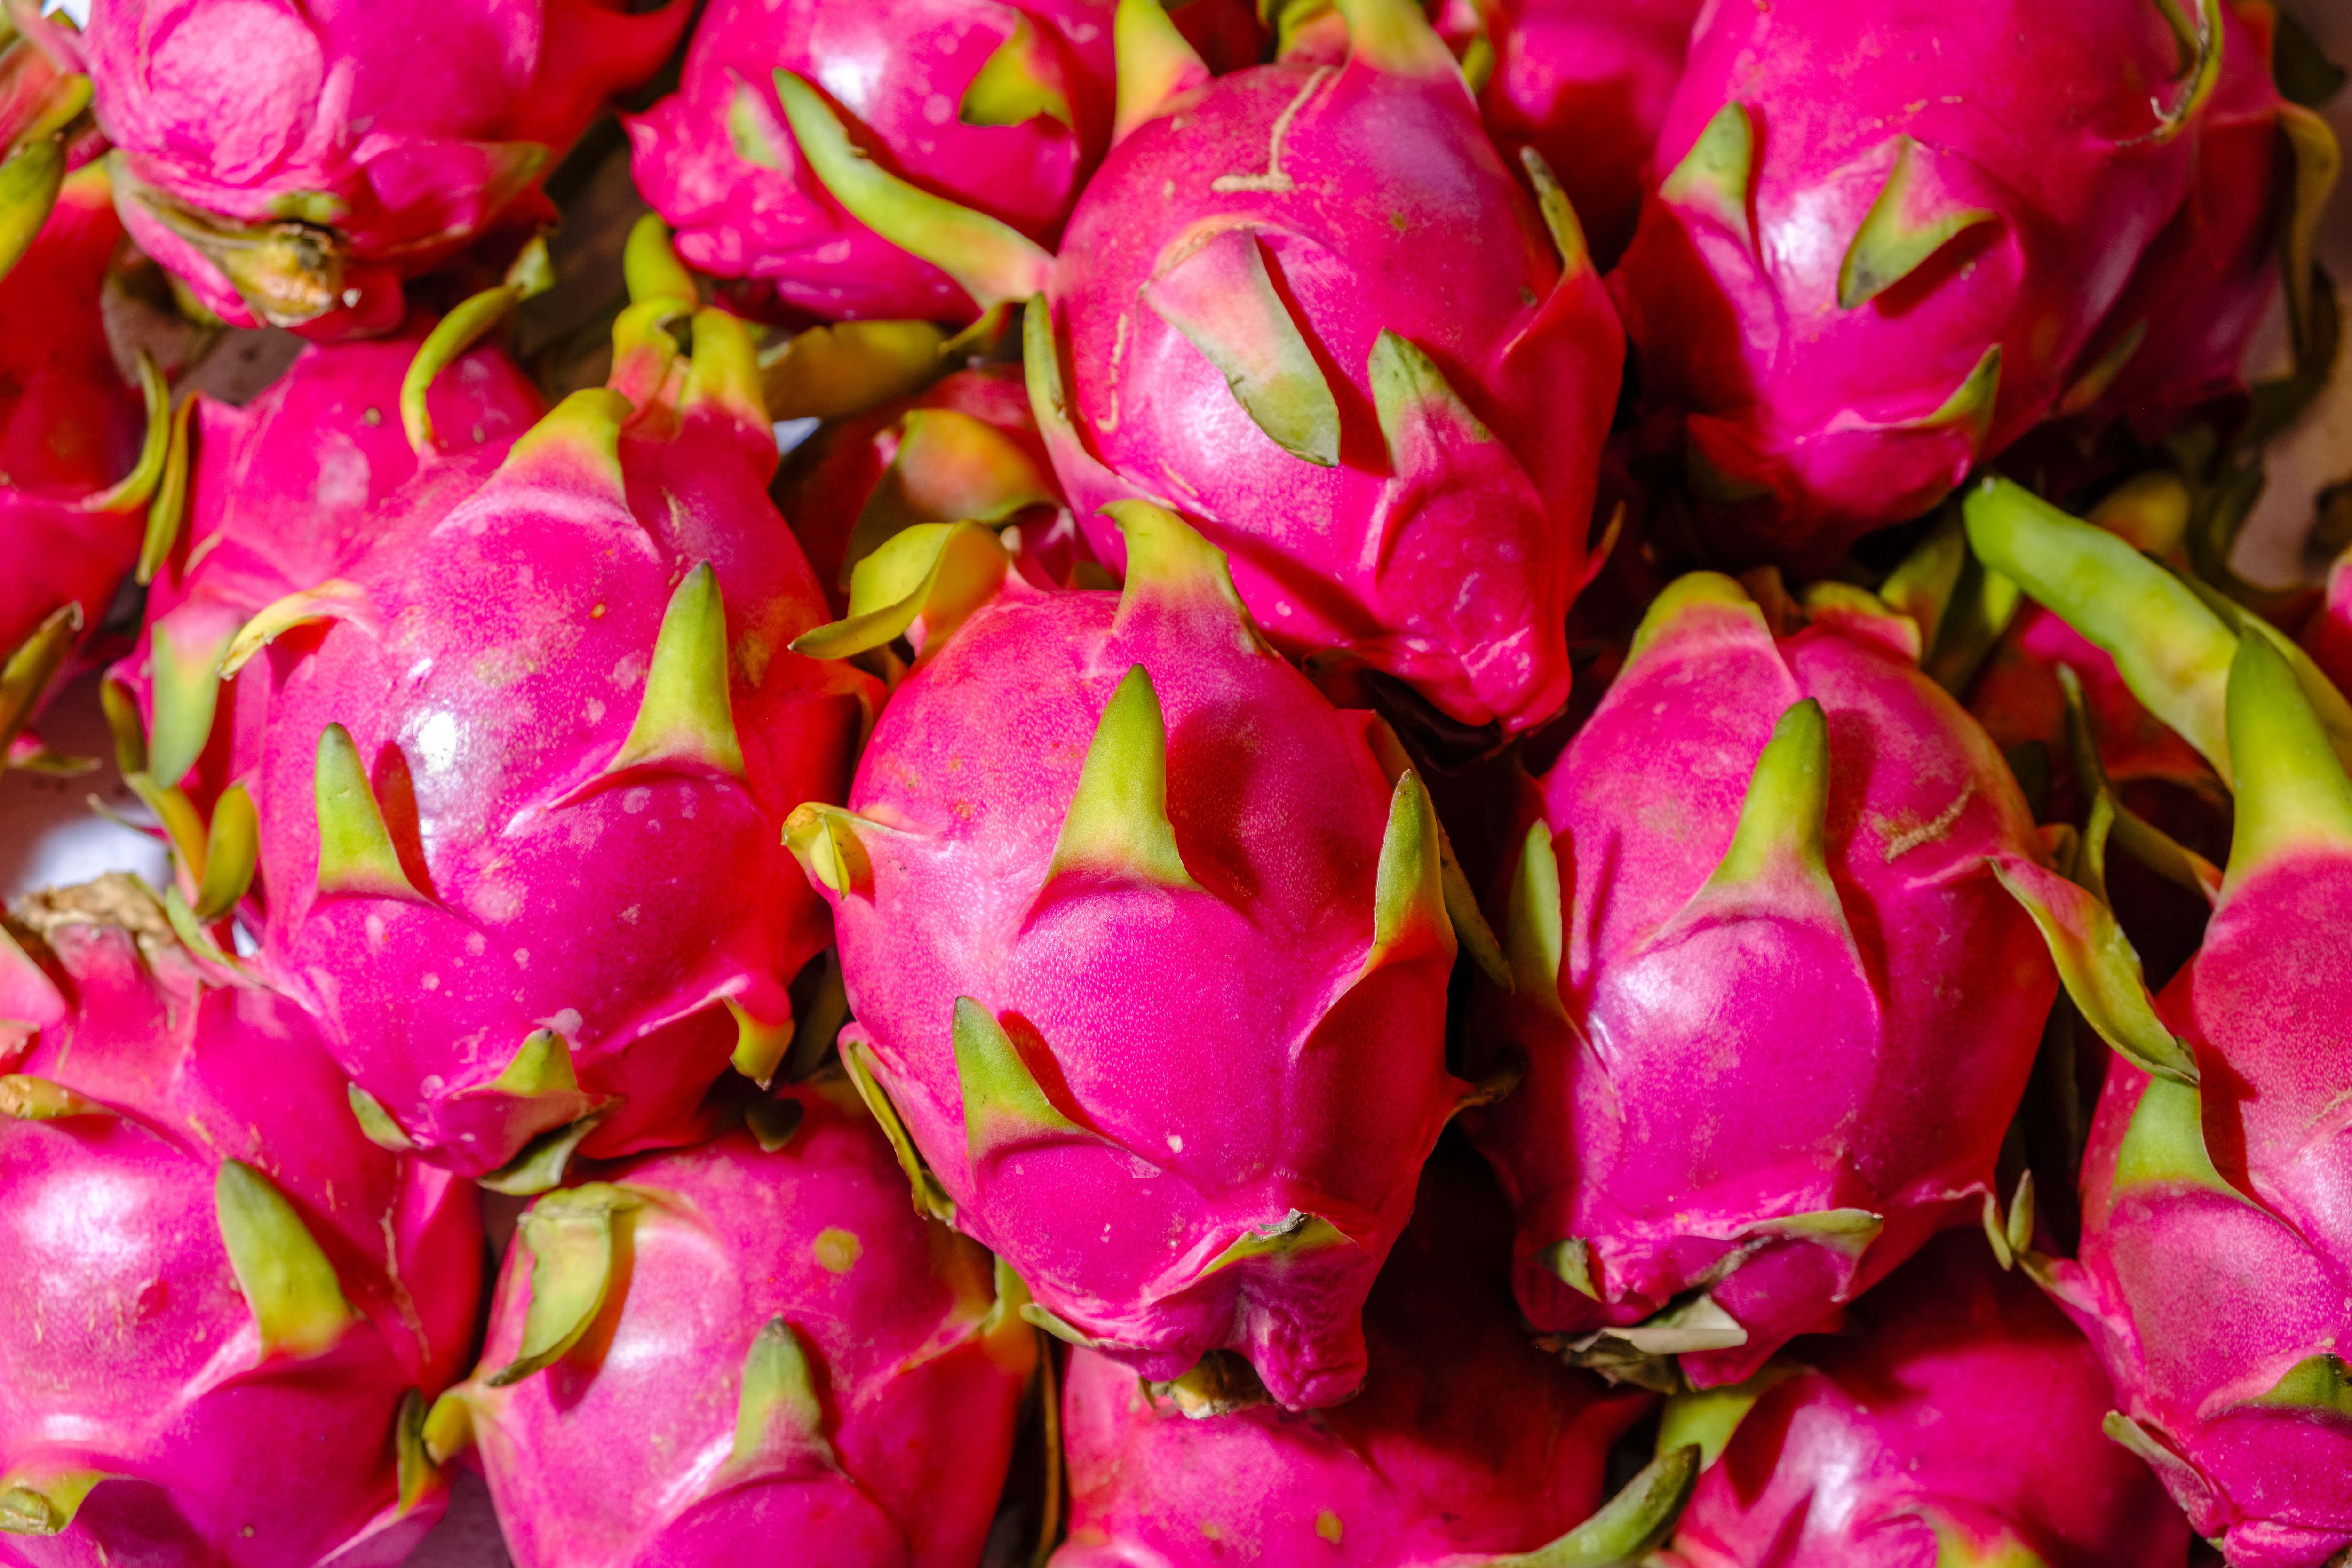 Dragon Fruit: Nutrition, Benefits, and How to Eat It